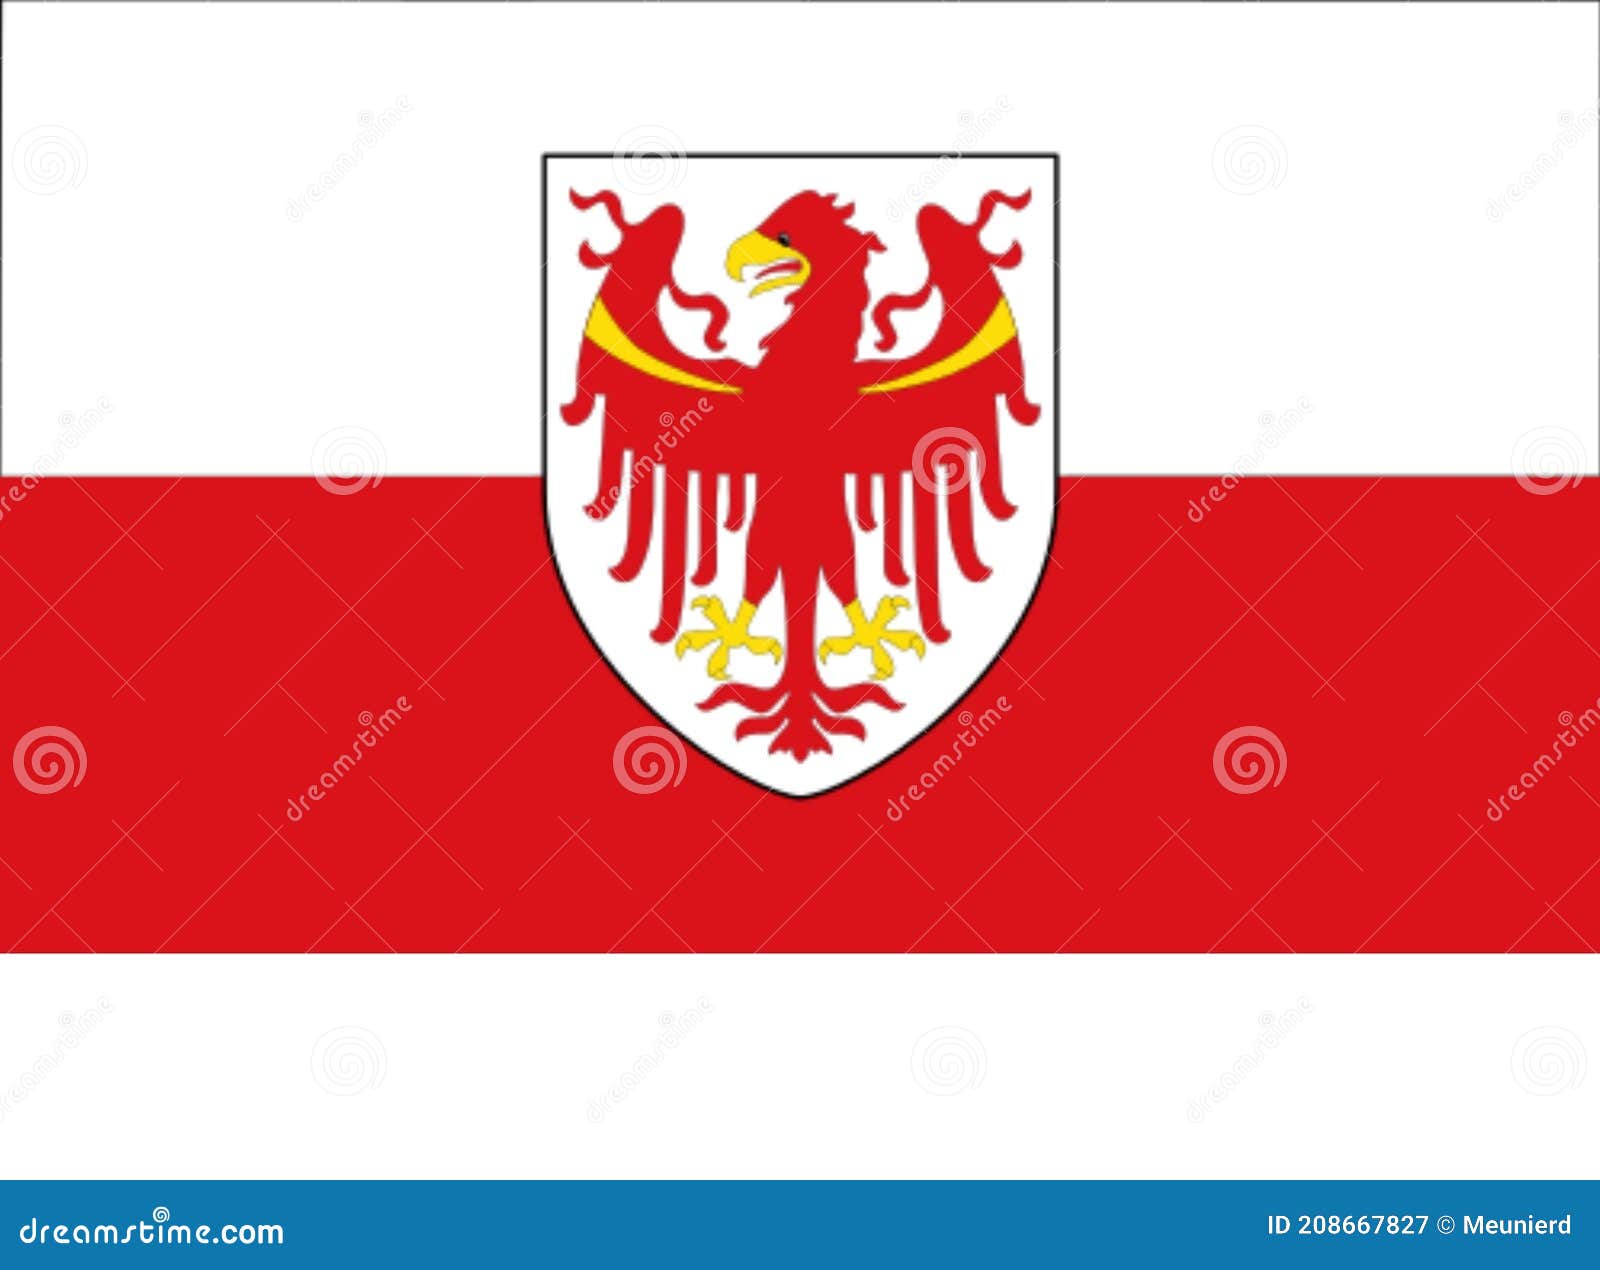 glossy glass flag of people of south tyrol